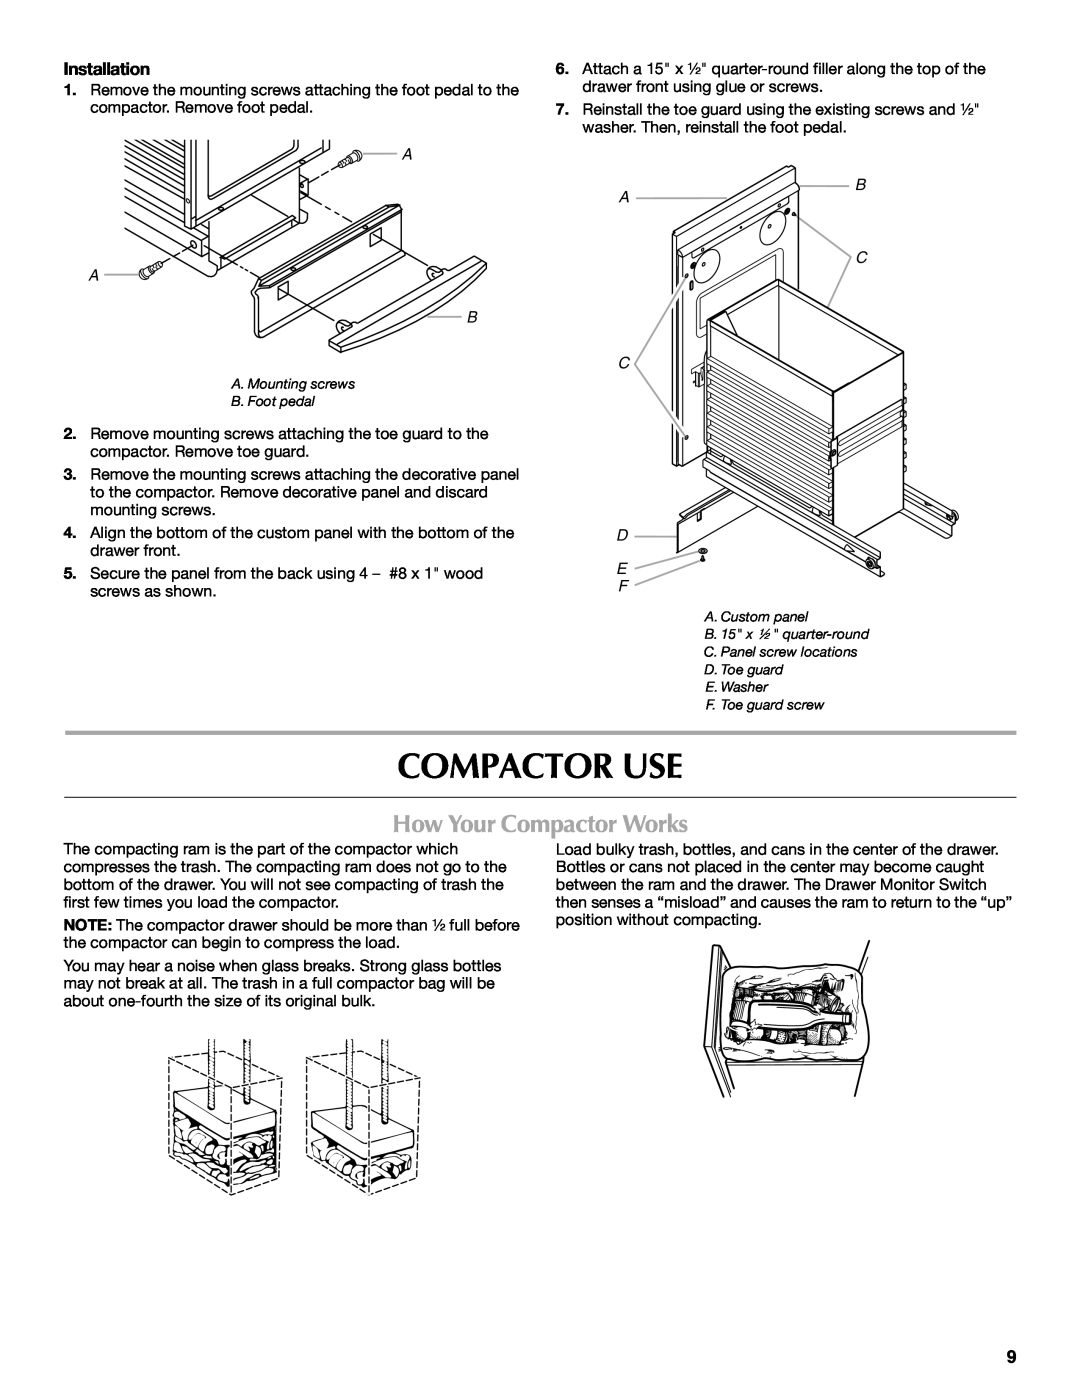 Maytag MTUC7000AWS, W10190314A manual Compactor Use, How Your Compactor Works, A C D E F, Installation 